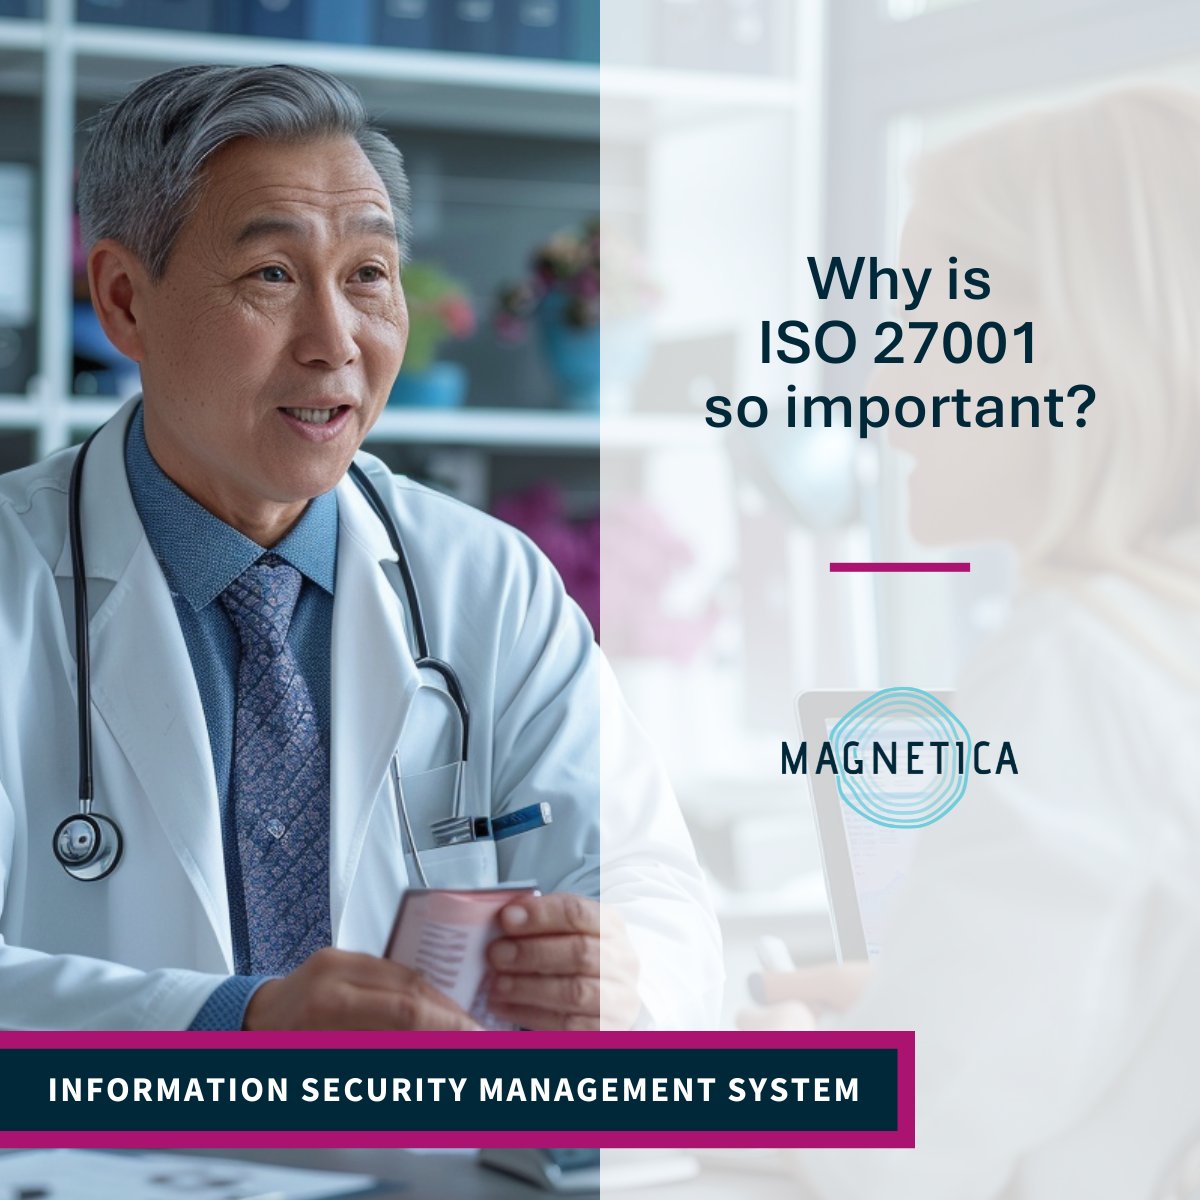 ISO 27001 ensures the highest security standards for protecting sensitive patient data: a necessity in healthcare. Learn more about the standard and how @MagneticaAU is protecting our partners. hubs.li/Q02vmbHd0 #ISO27001 #DataSecurity #MedicalDevices #HealthTech #MRITech